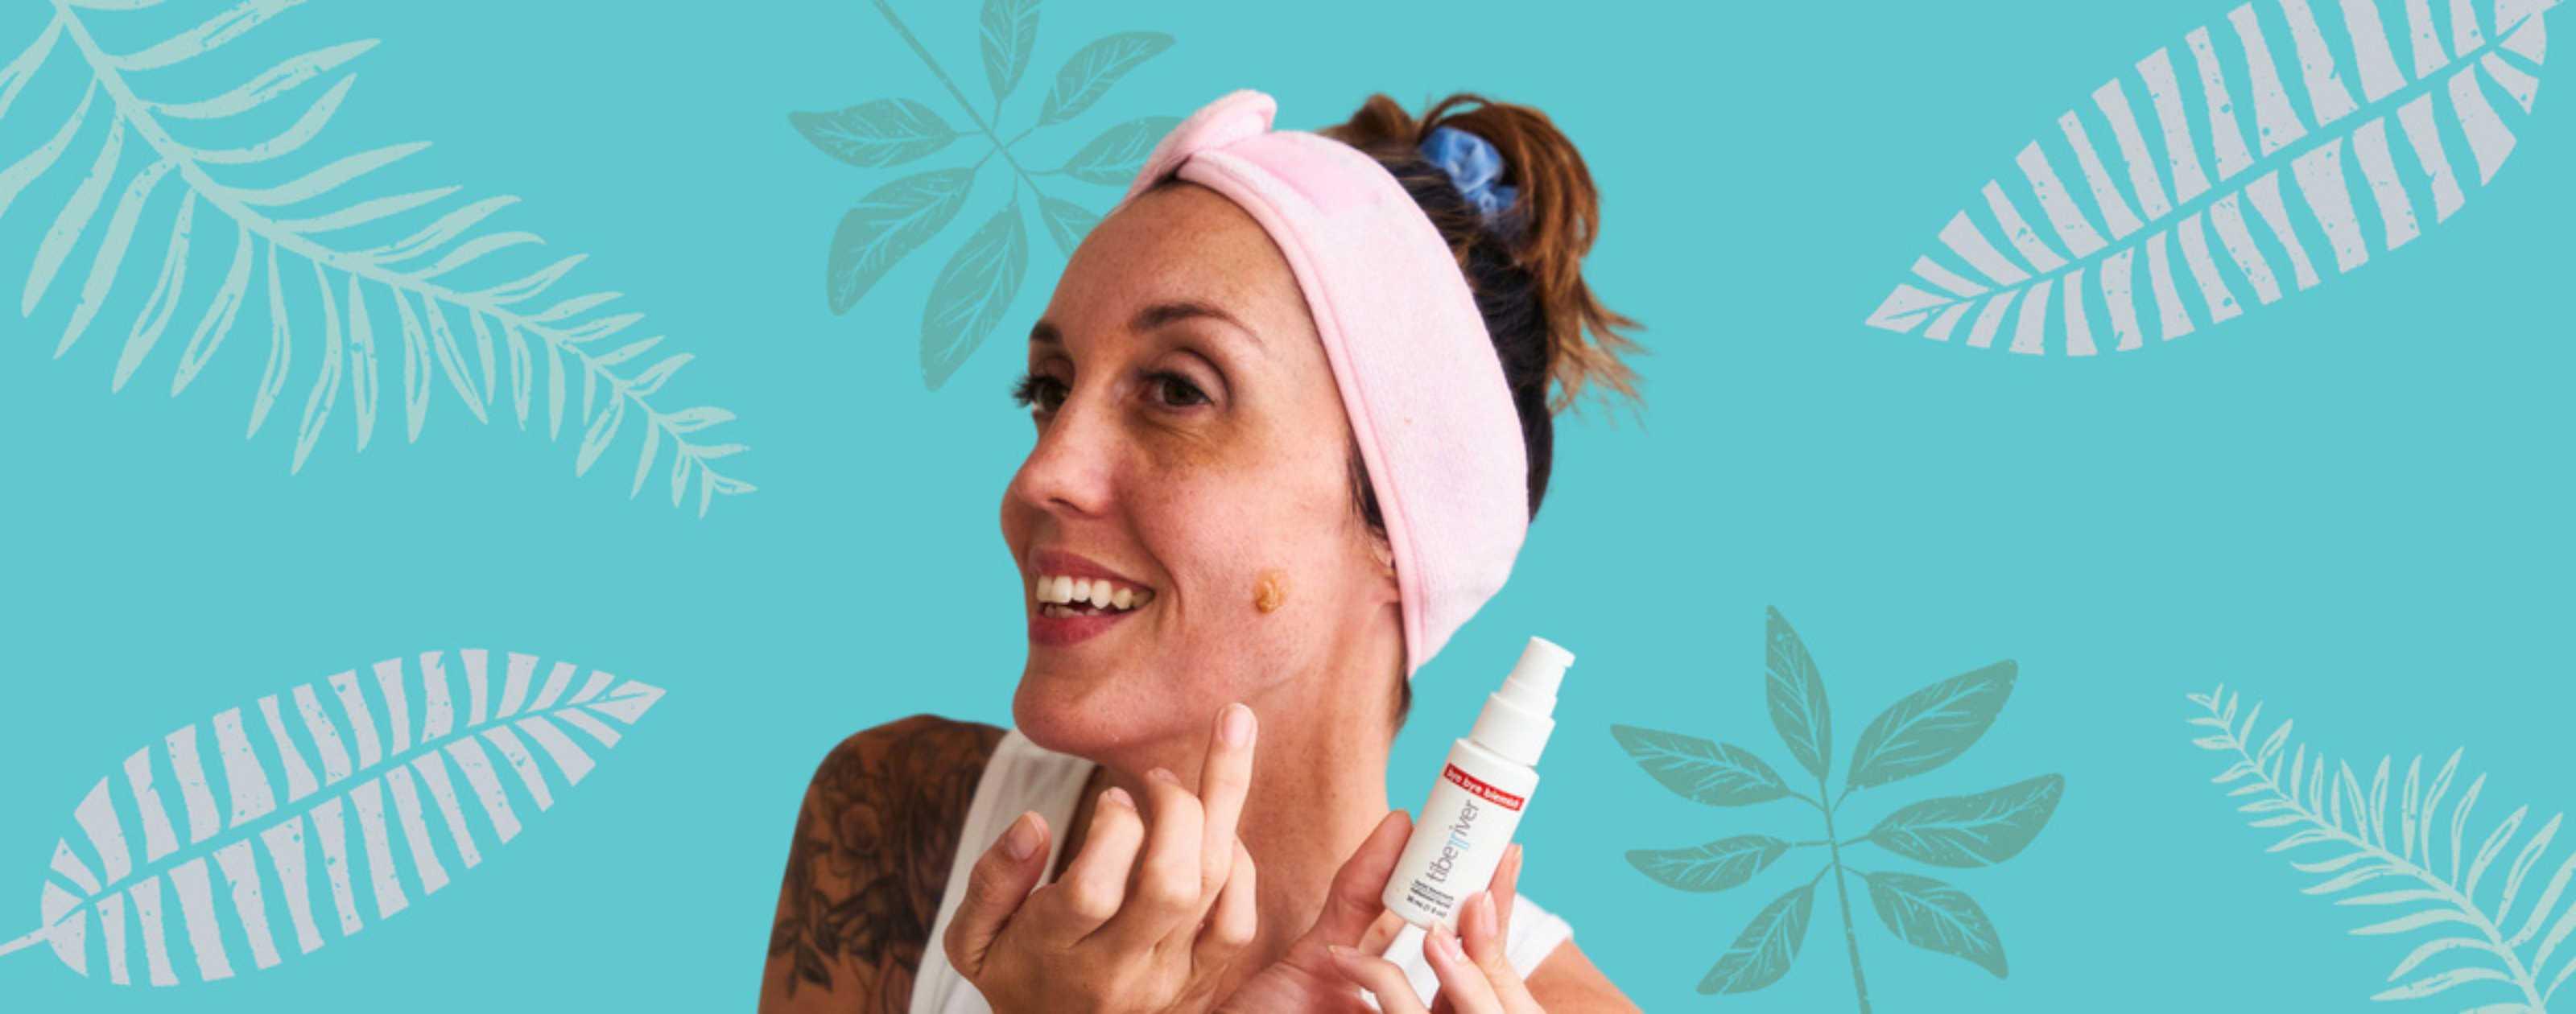 Treating Adult Acne Naturally: Tips and Product Recommendations